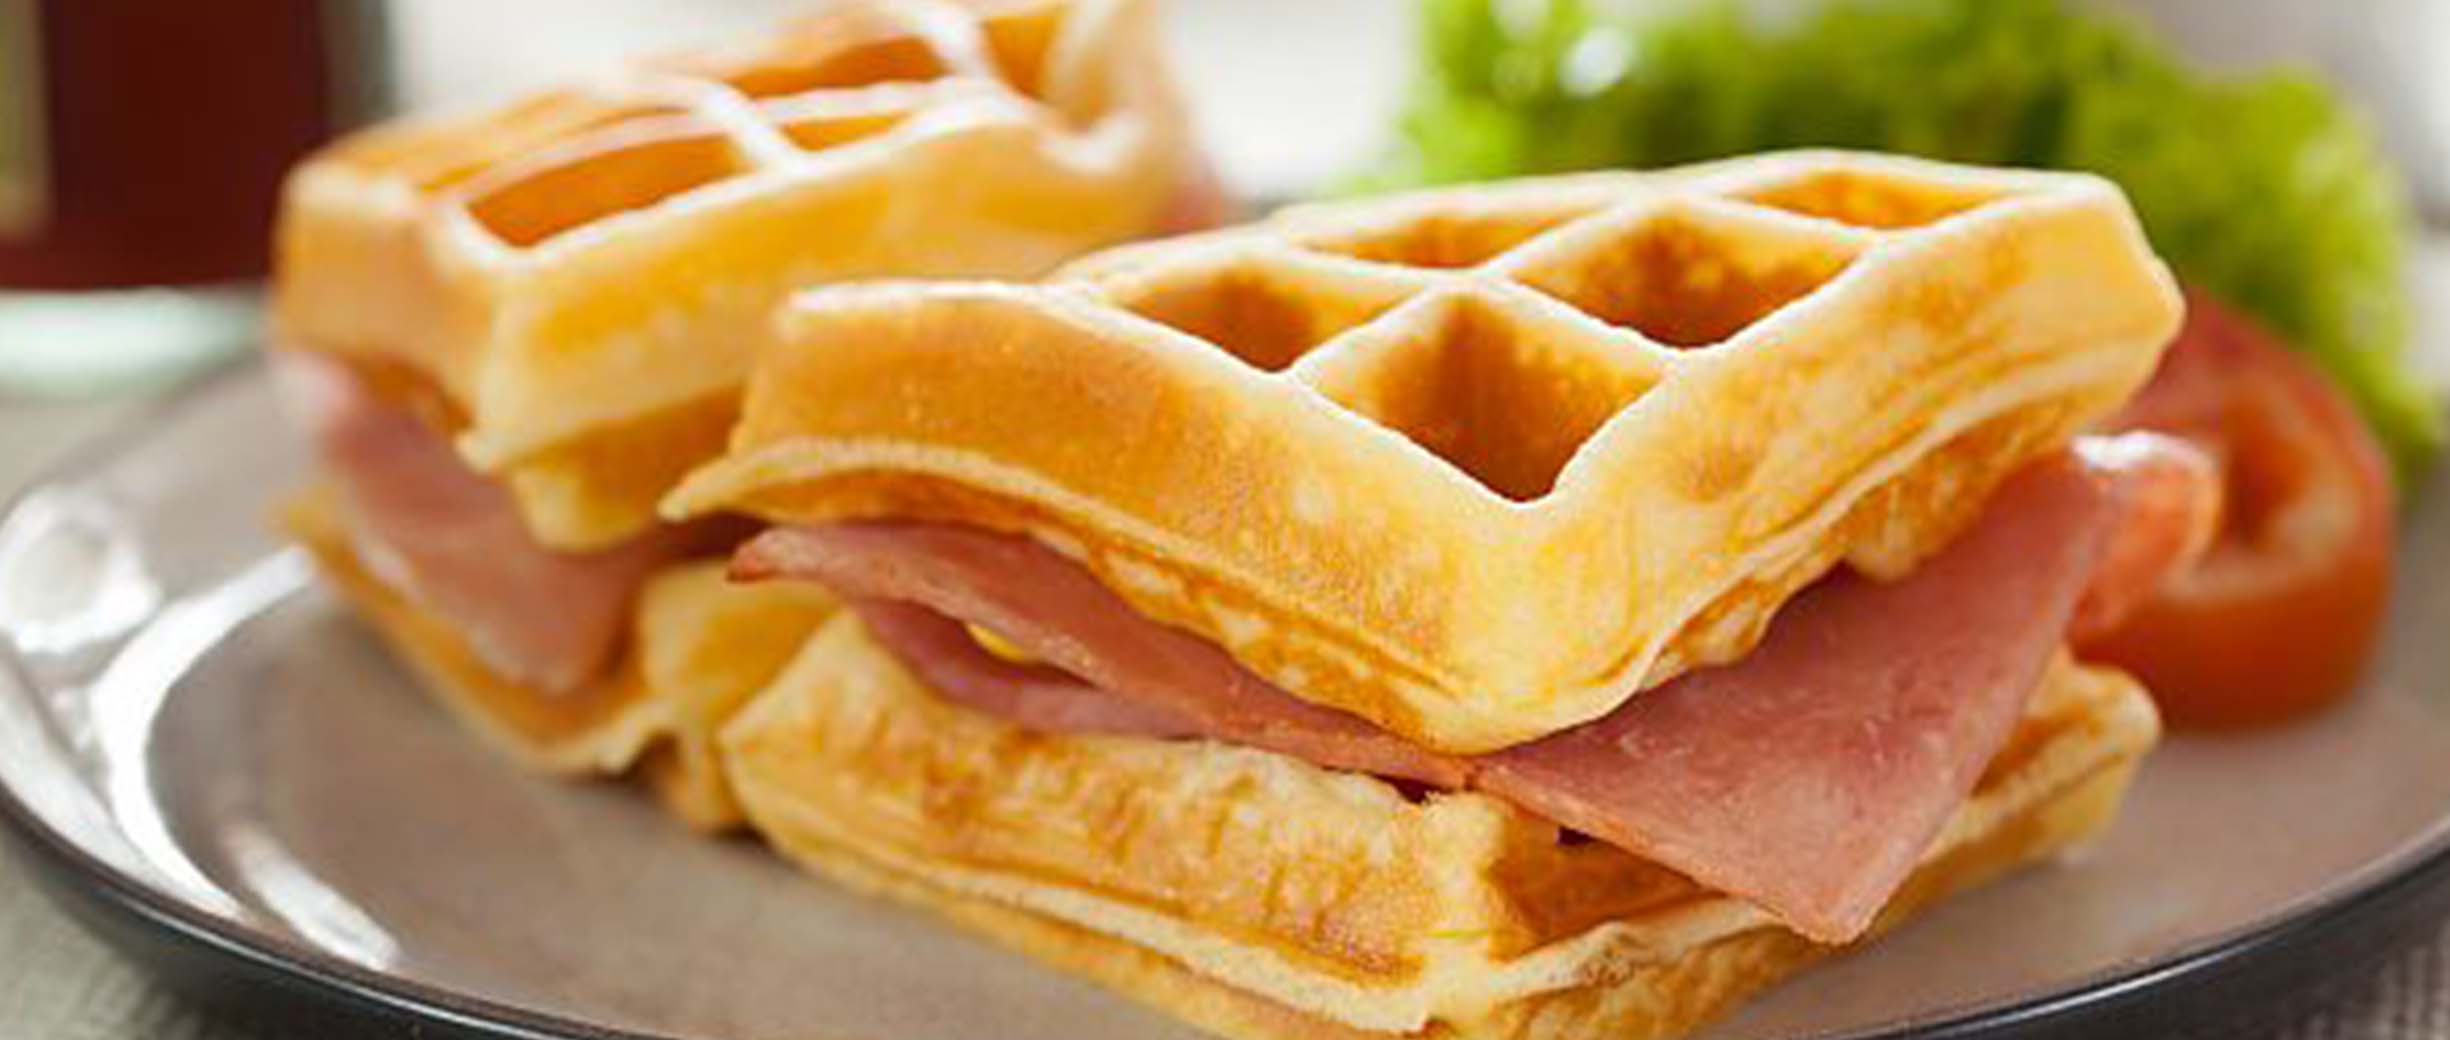 10 Ham Sandwich Recipes for Breakfast, Lunch and Dinner